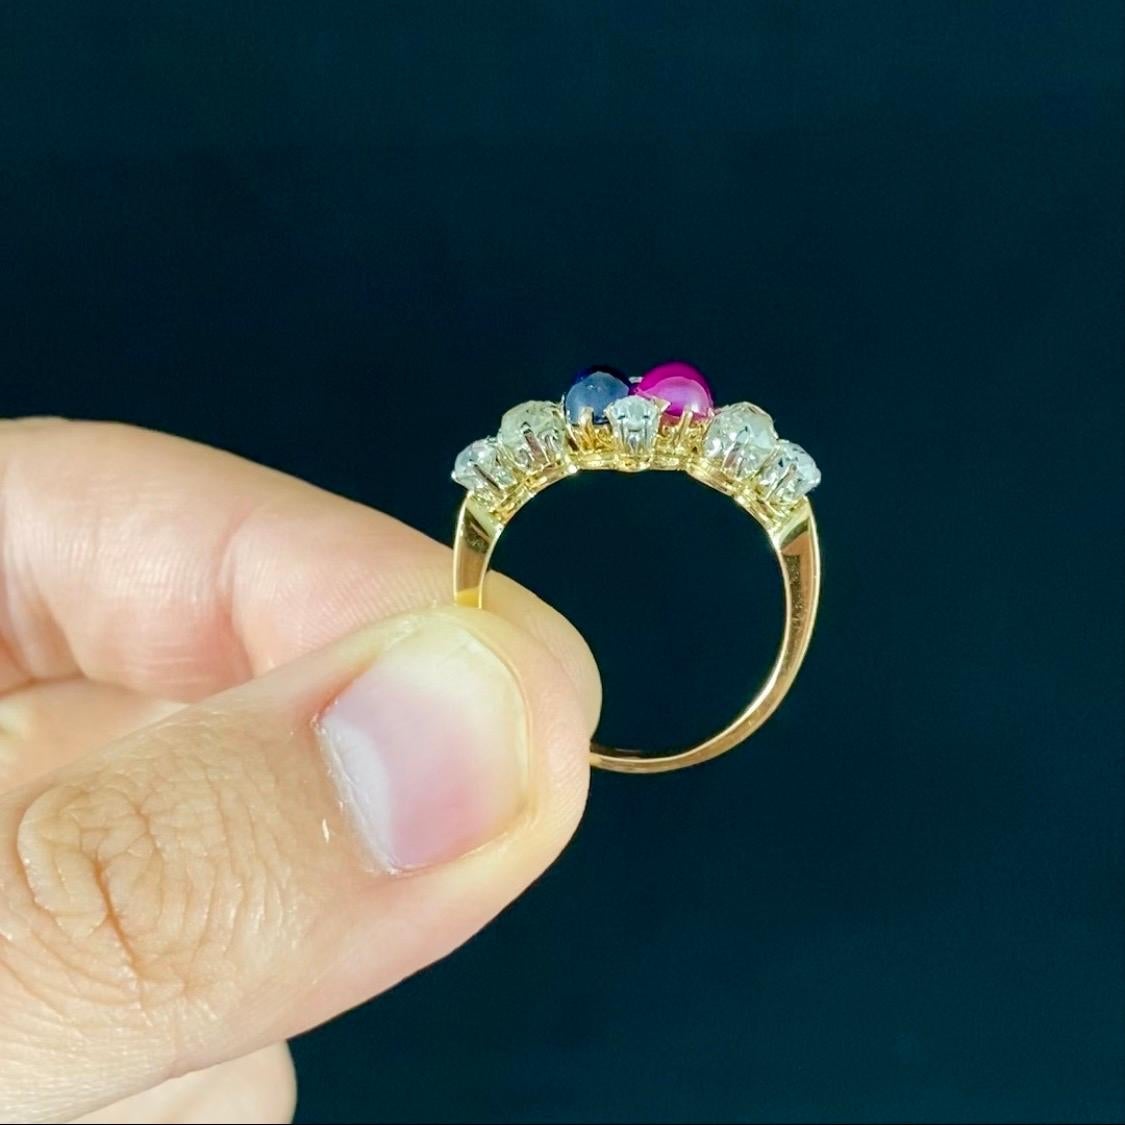 Antique Edwardian Burmese Ruby Sapphire Old Diamond Engagement Ring Gold, 1910s 5